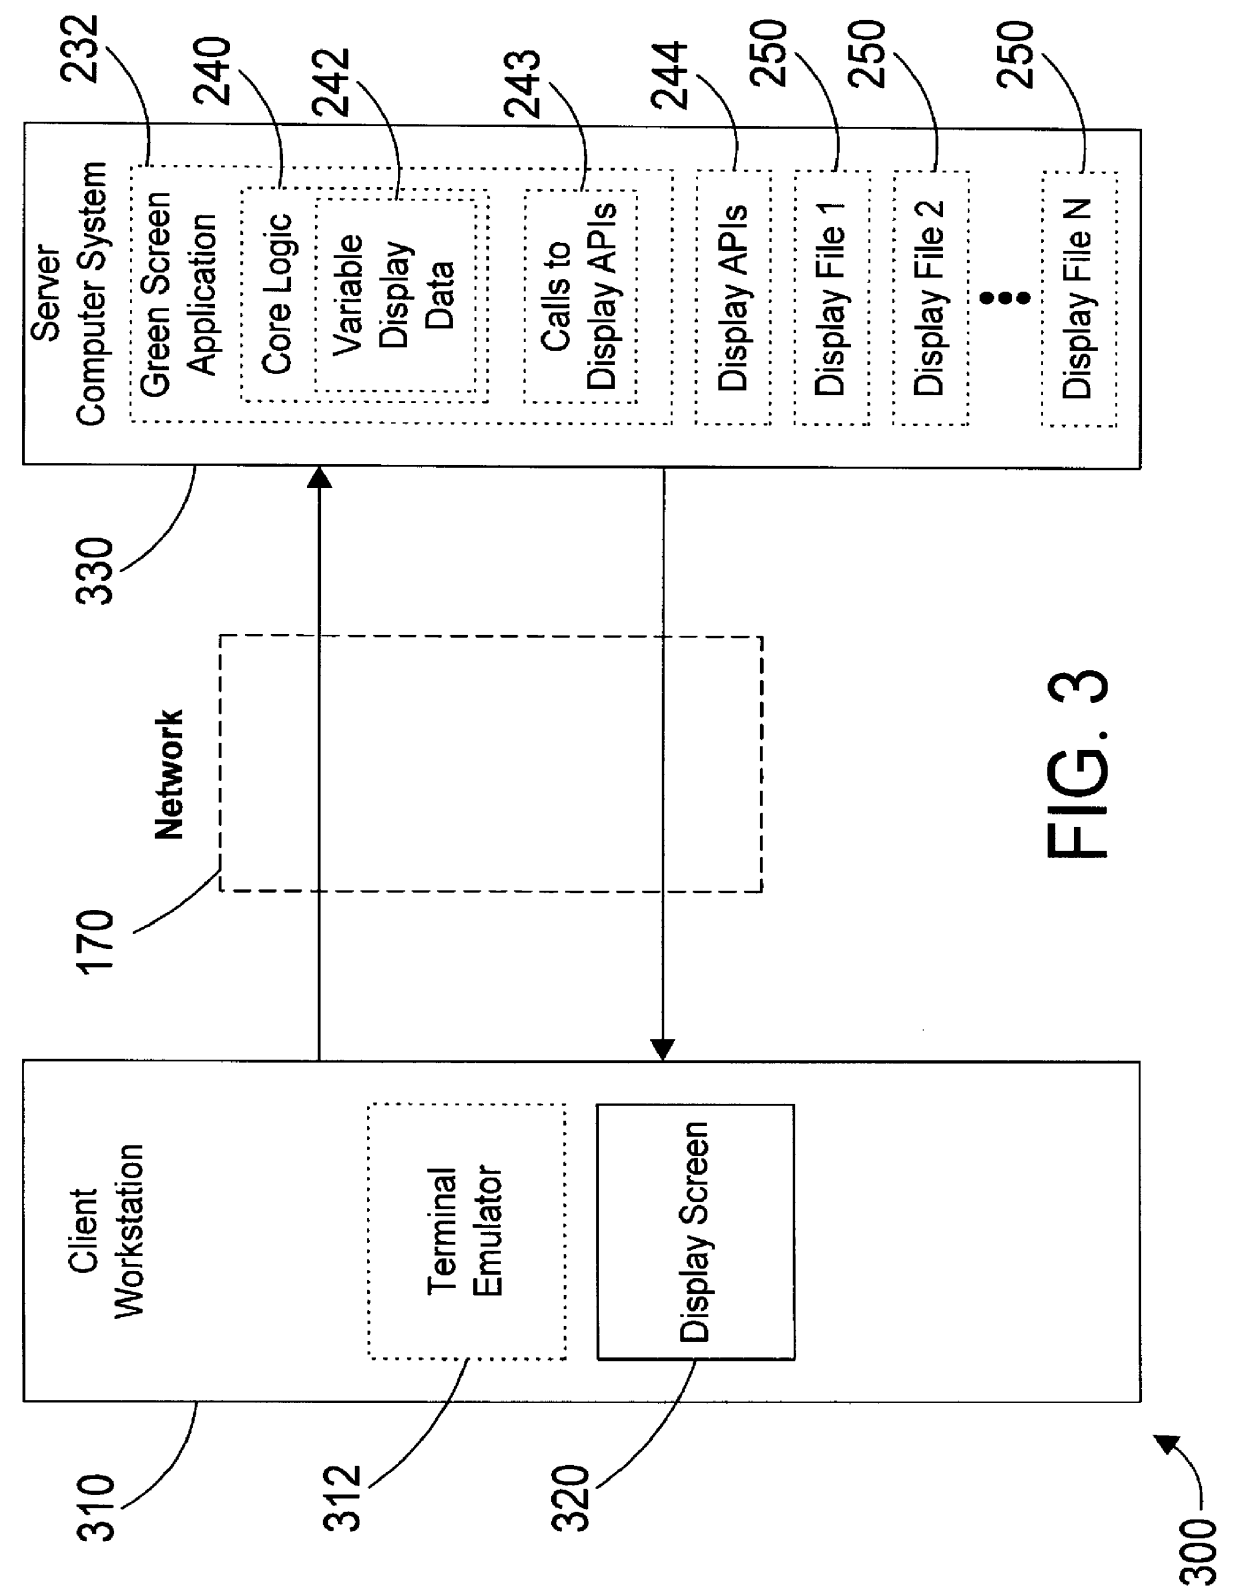 Object oriented apparatus and method for providing a graphical user interface for host-based software applications